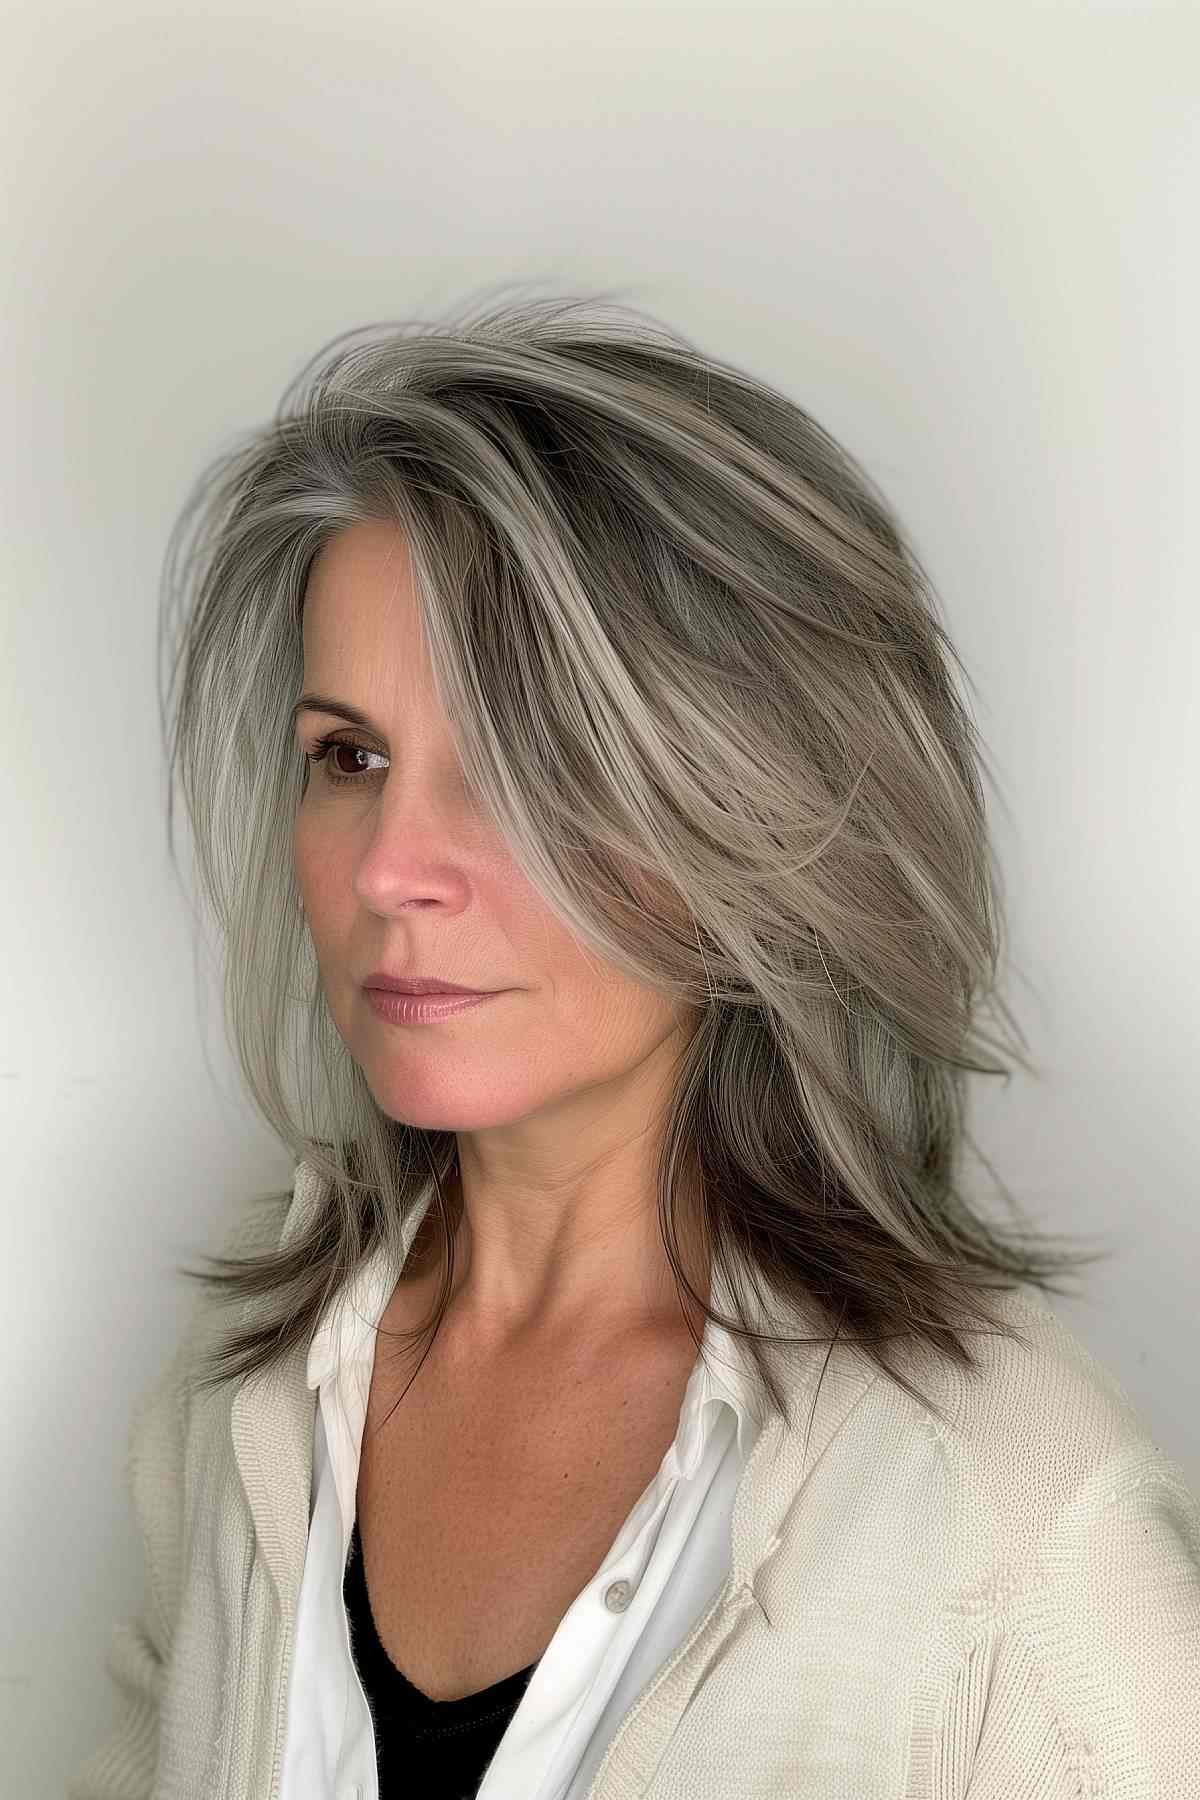 Middle-aged woman with straight hair styled in a modern Wolf Cut, showcasing layered volume for a chic appearance.